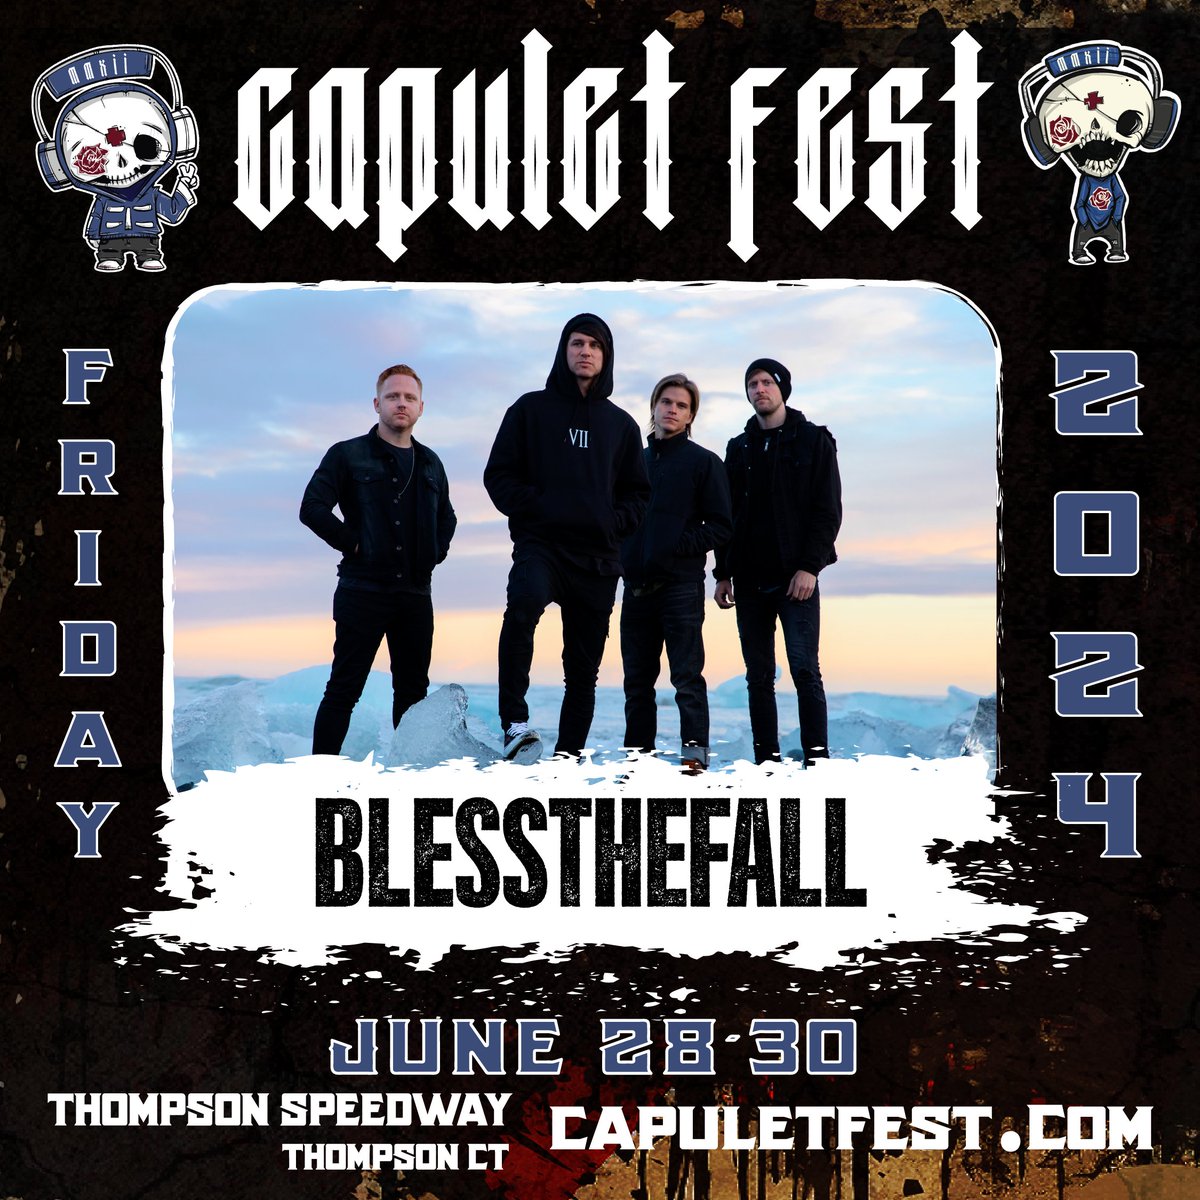 We'll be playing Capulet Fest on June 28th! Tickets on sale now at capuletfest.com